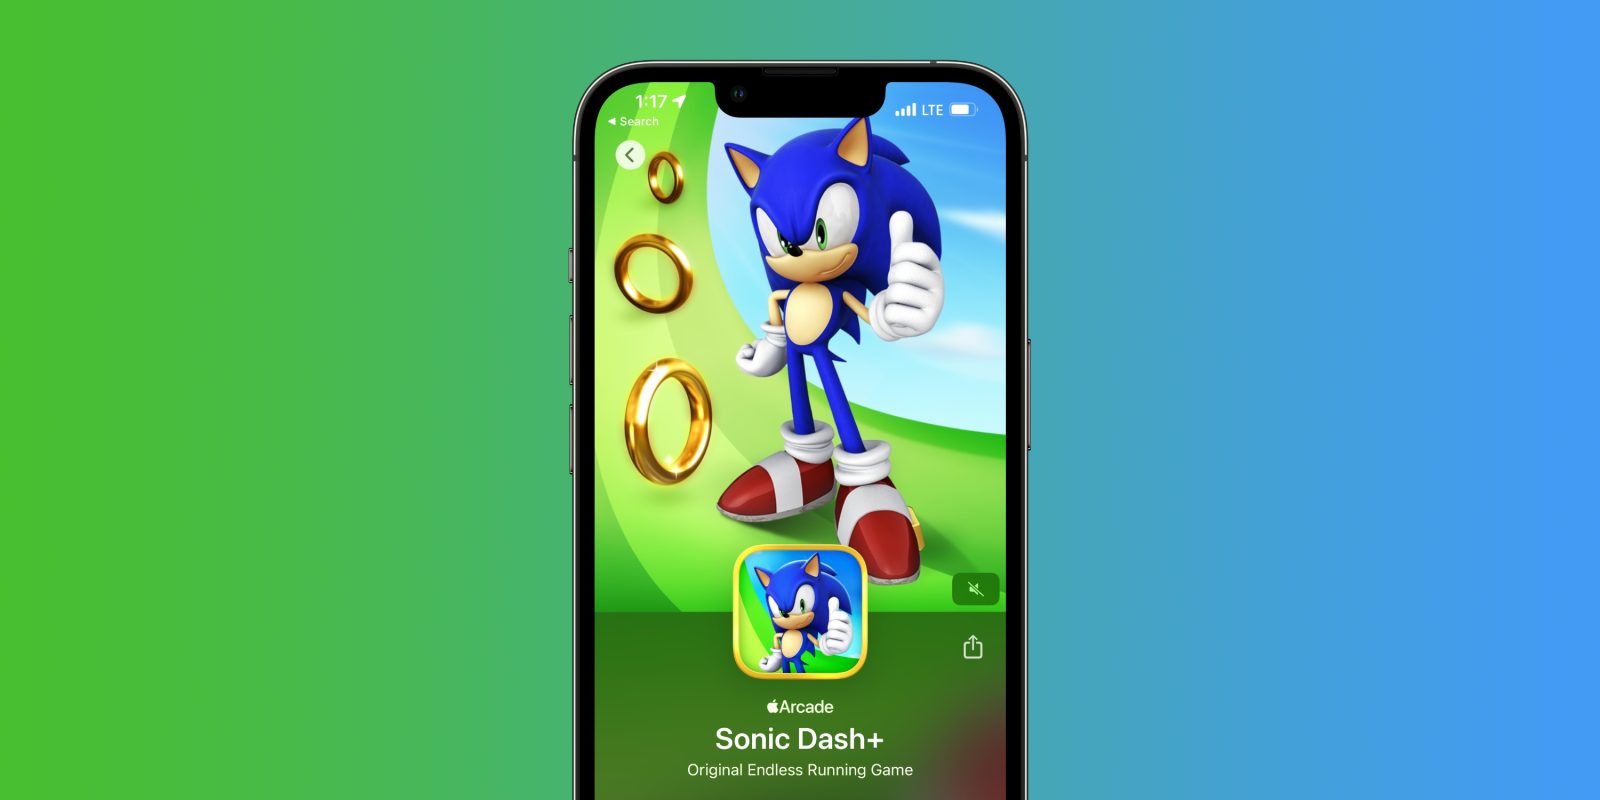 https://9to5mac.com/wp-content/uploads/sites/6/2022/04/sonic-dash-apple-arcade-launch.jpg?quality=82&strip=all&w=1600